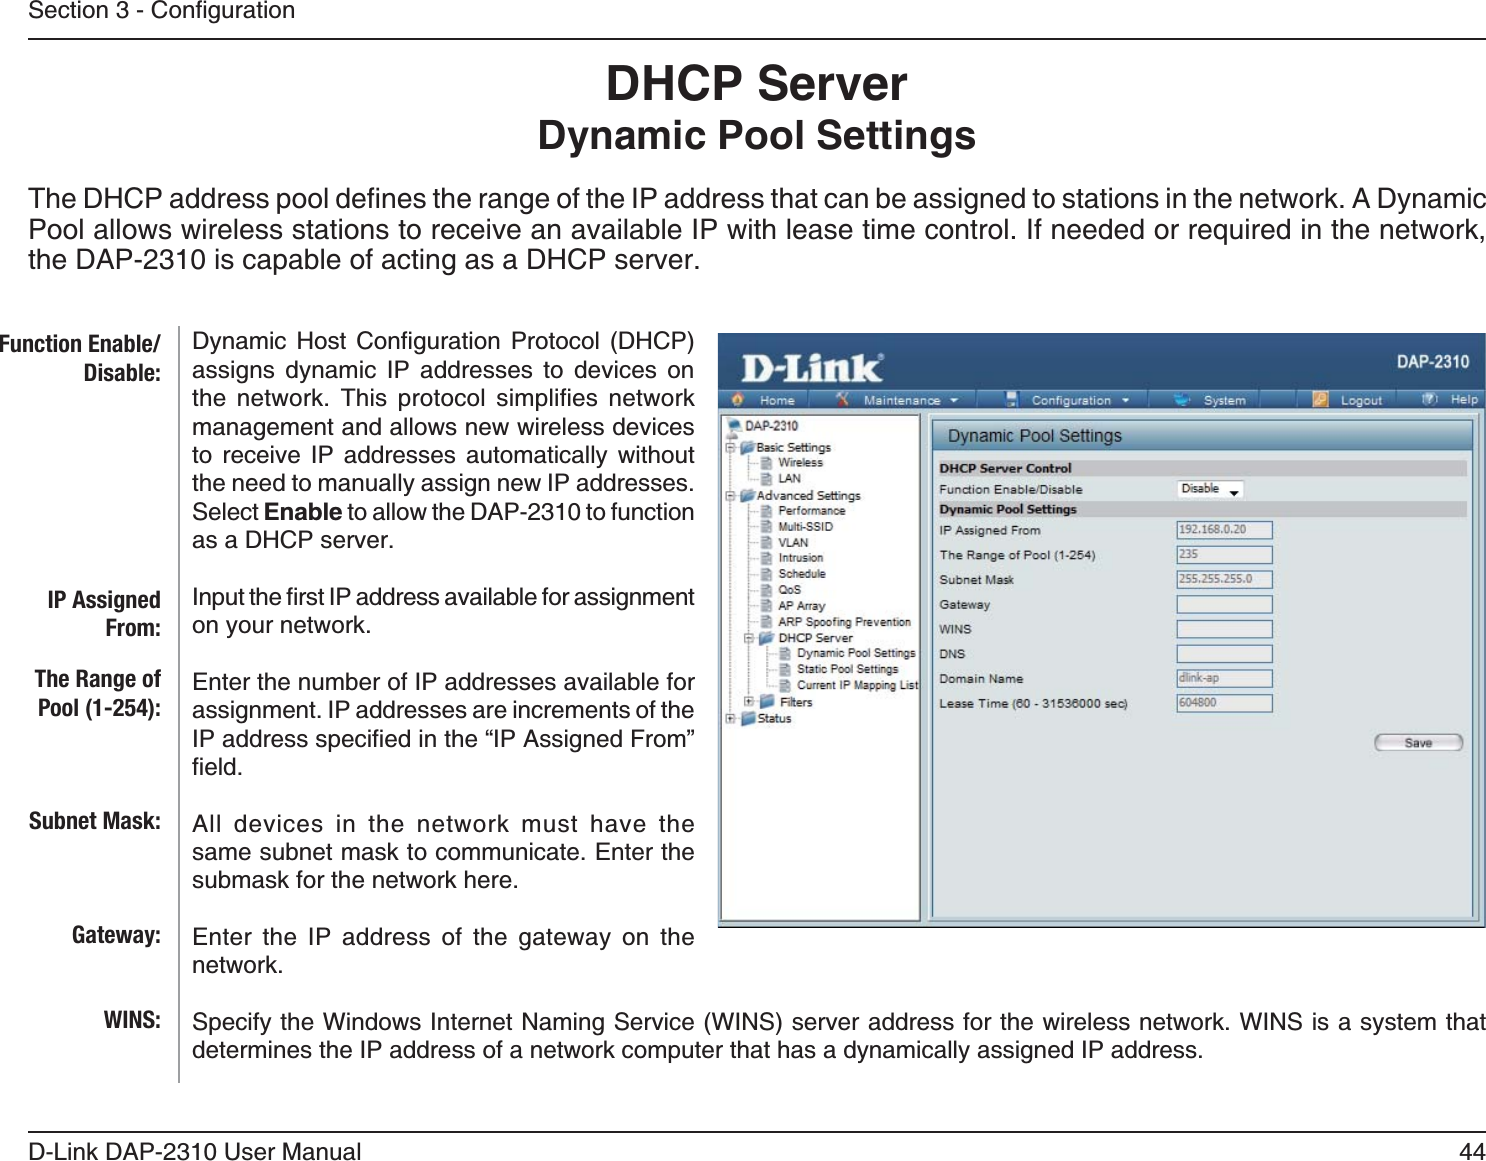 44D-Link DAP-2310 User ManualDHCP Server Dynamic Pool SettingsPool allows wireless stations to receive an available IP with lease time control. If needed or required in the network, the DAP-2310 is capable of acting as a DHCP server.    assigns dynamic IP addresses to devices on      management and allows new wireless devices to receive IP addresses automatically without the need to manually assign new IP addresses. Select Enable to allow the DAP-2310 to function as a DHCP server.on your network.Enter the number of IP addresses available for assignment. IP addresses are increments of the All devices in the network must have the same subnet mask to communicate. Enter the submask for the network here.Enter the IP address of the gateway on the network.determines the IP address of a network computer that has a dynamically assigned IP address.Function Enable/Disable:IP Assigned From:The Range of Pool (1-254):Subnet Mask:Gateway:WINS: